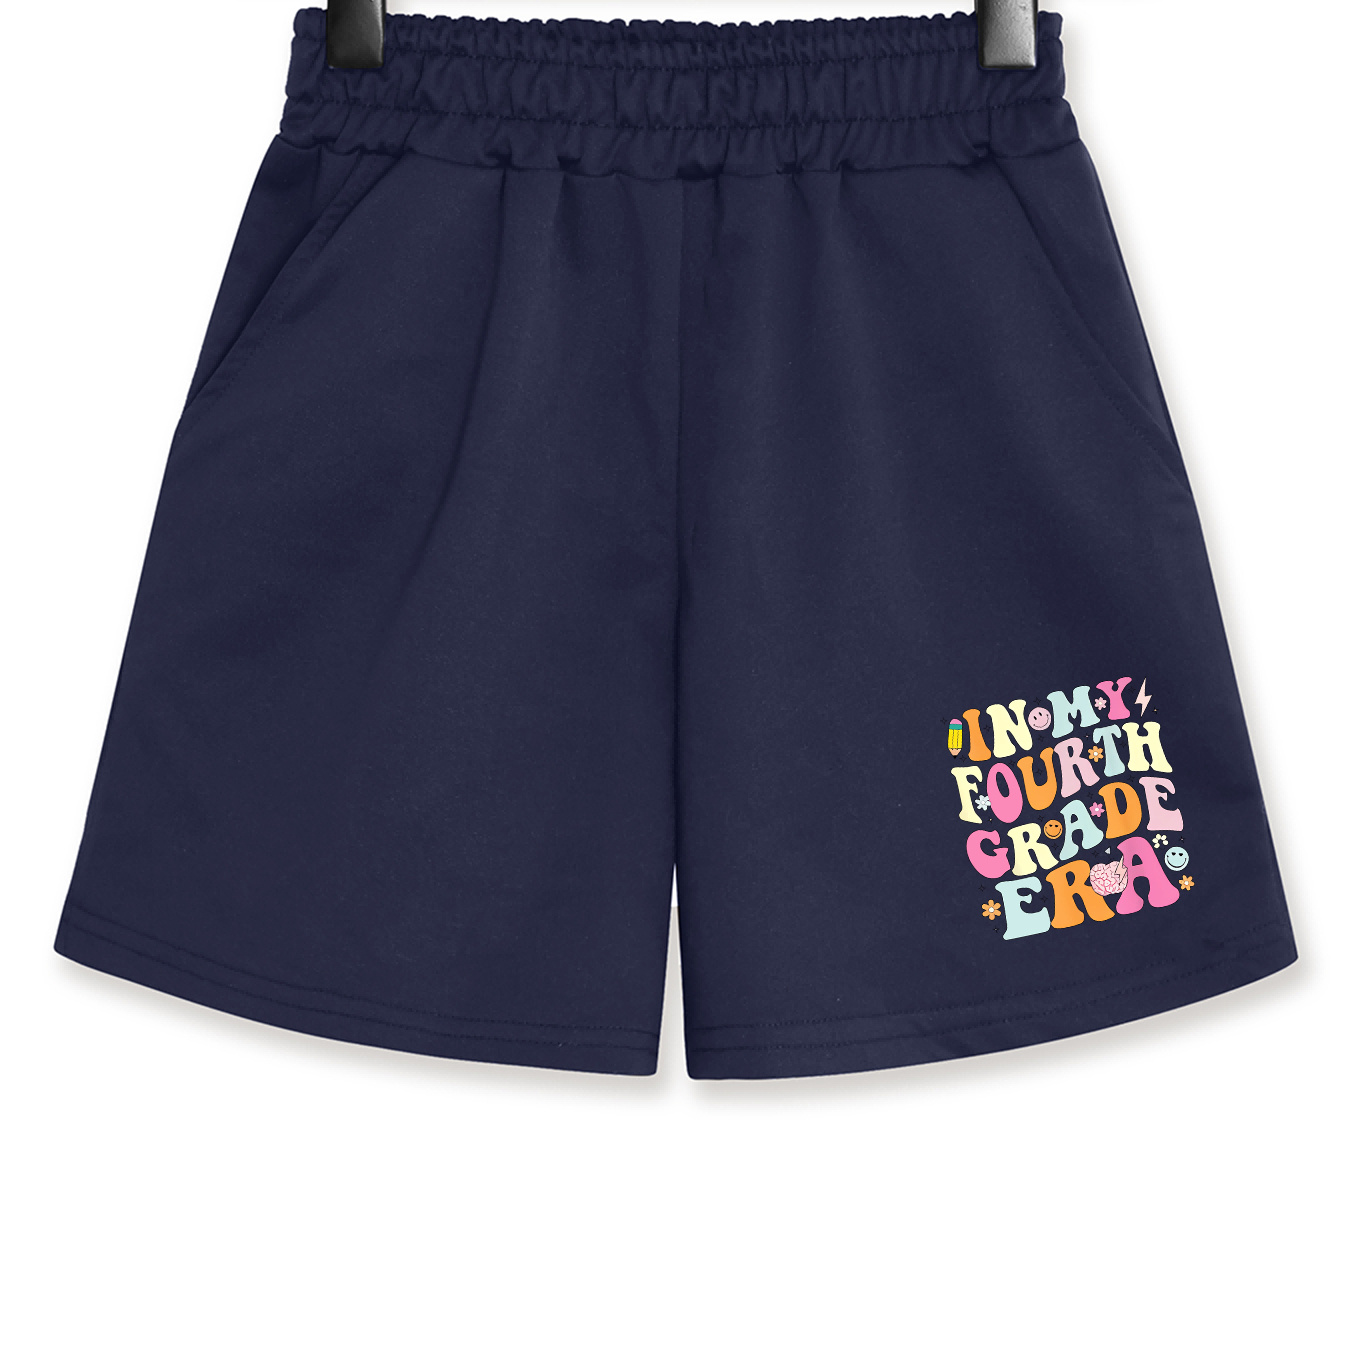 

In My Fourth Grade Era Print Girl's Solid Color Slightly Stretch Shorts With Side Pockets, Casual Breathable Comfy Bottoms For Outdoor Jogging, Running, Sport Activities